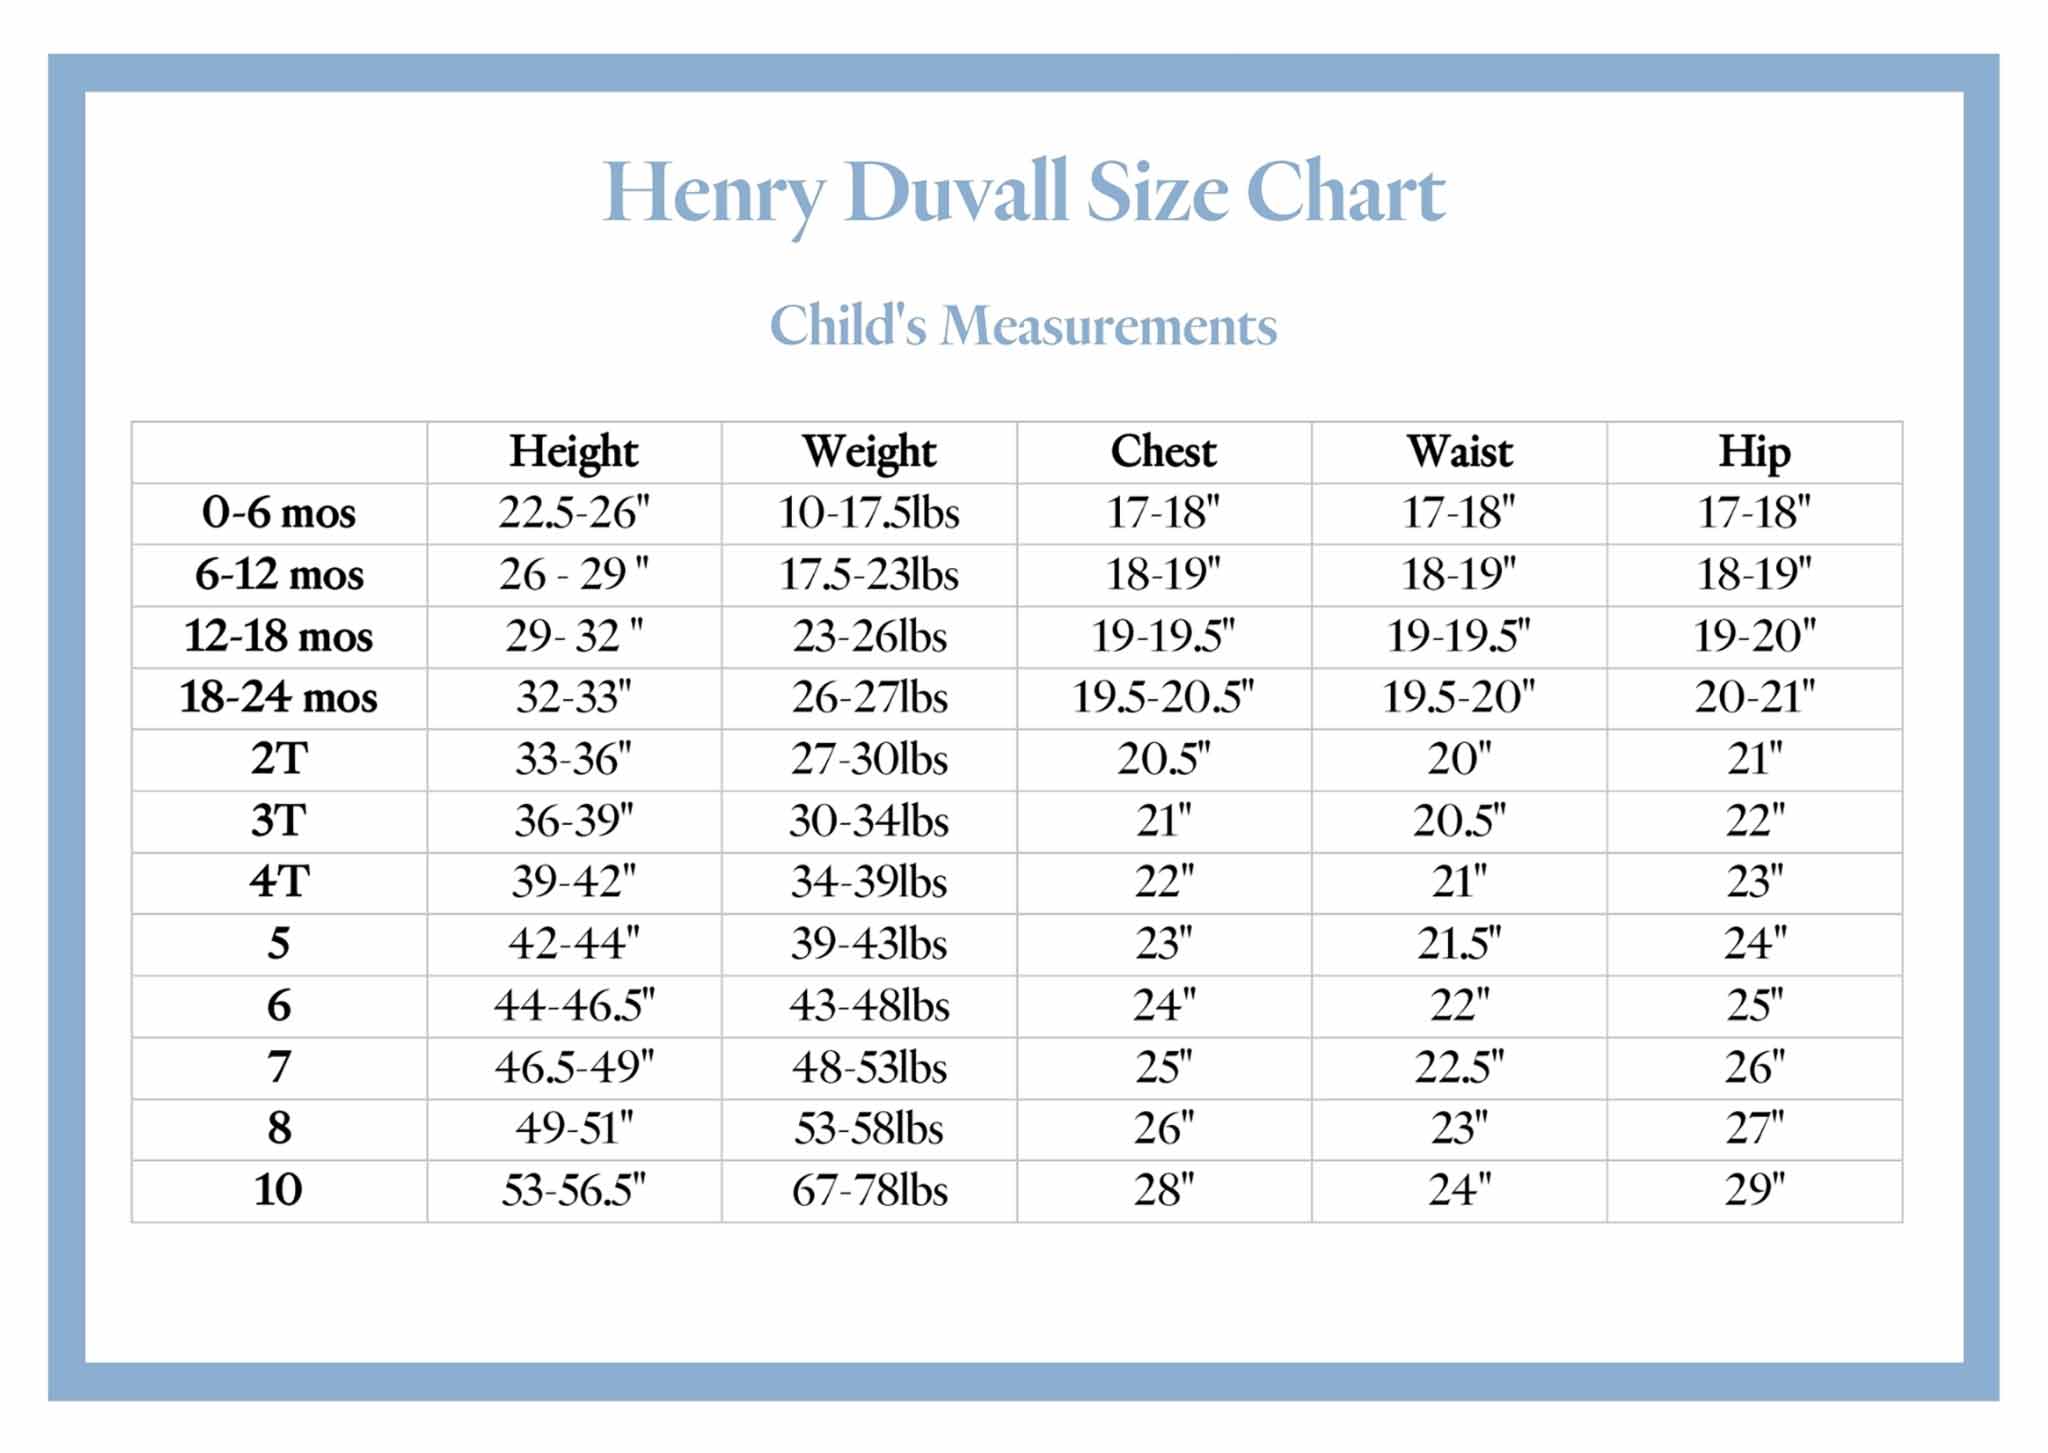 Size Charts – Henry Duvall